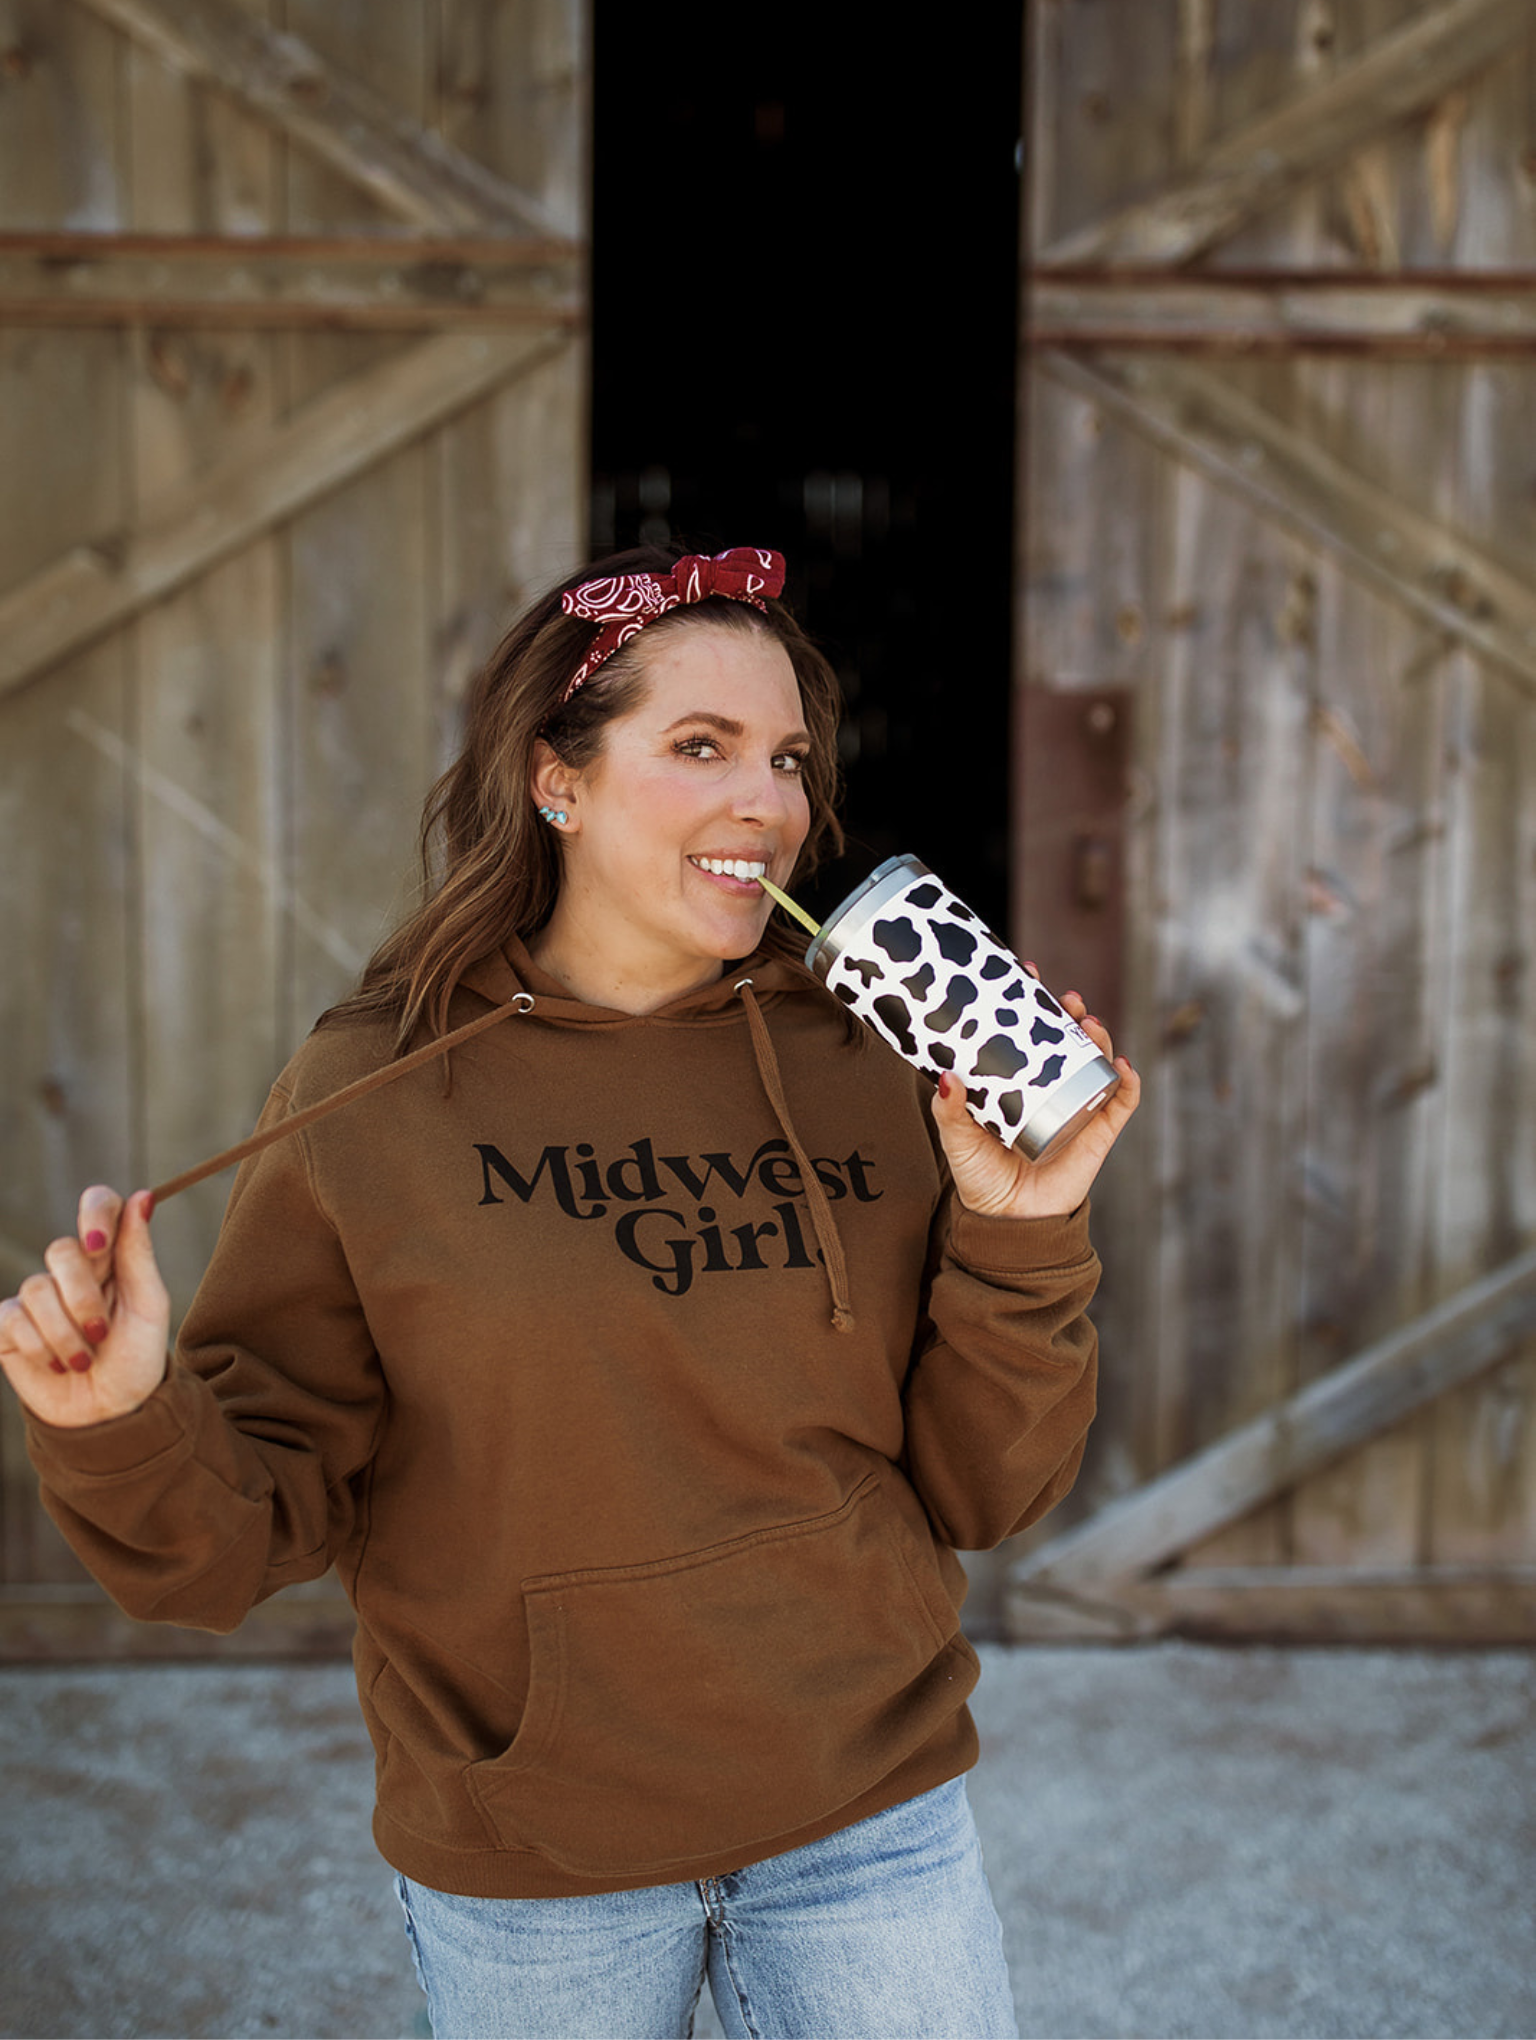 Annaliese in Midwest Girl sweatshirt and drinking from cow cup